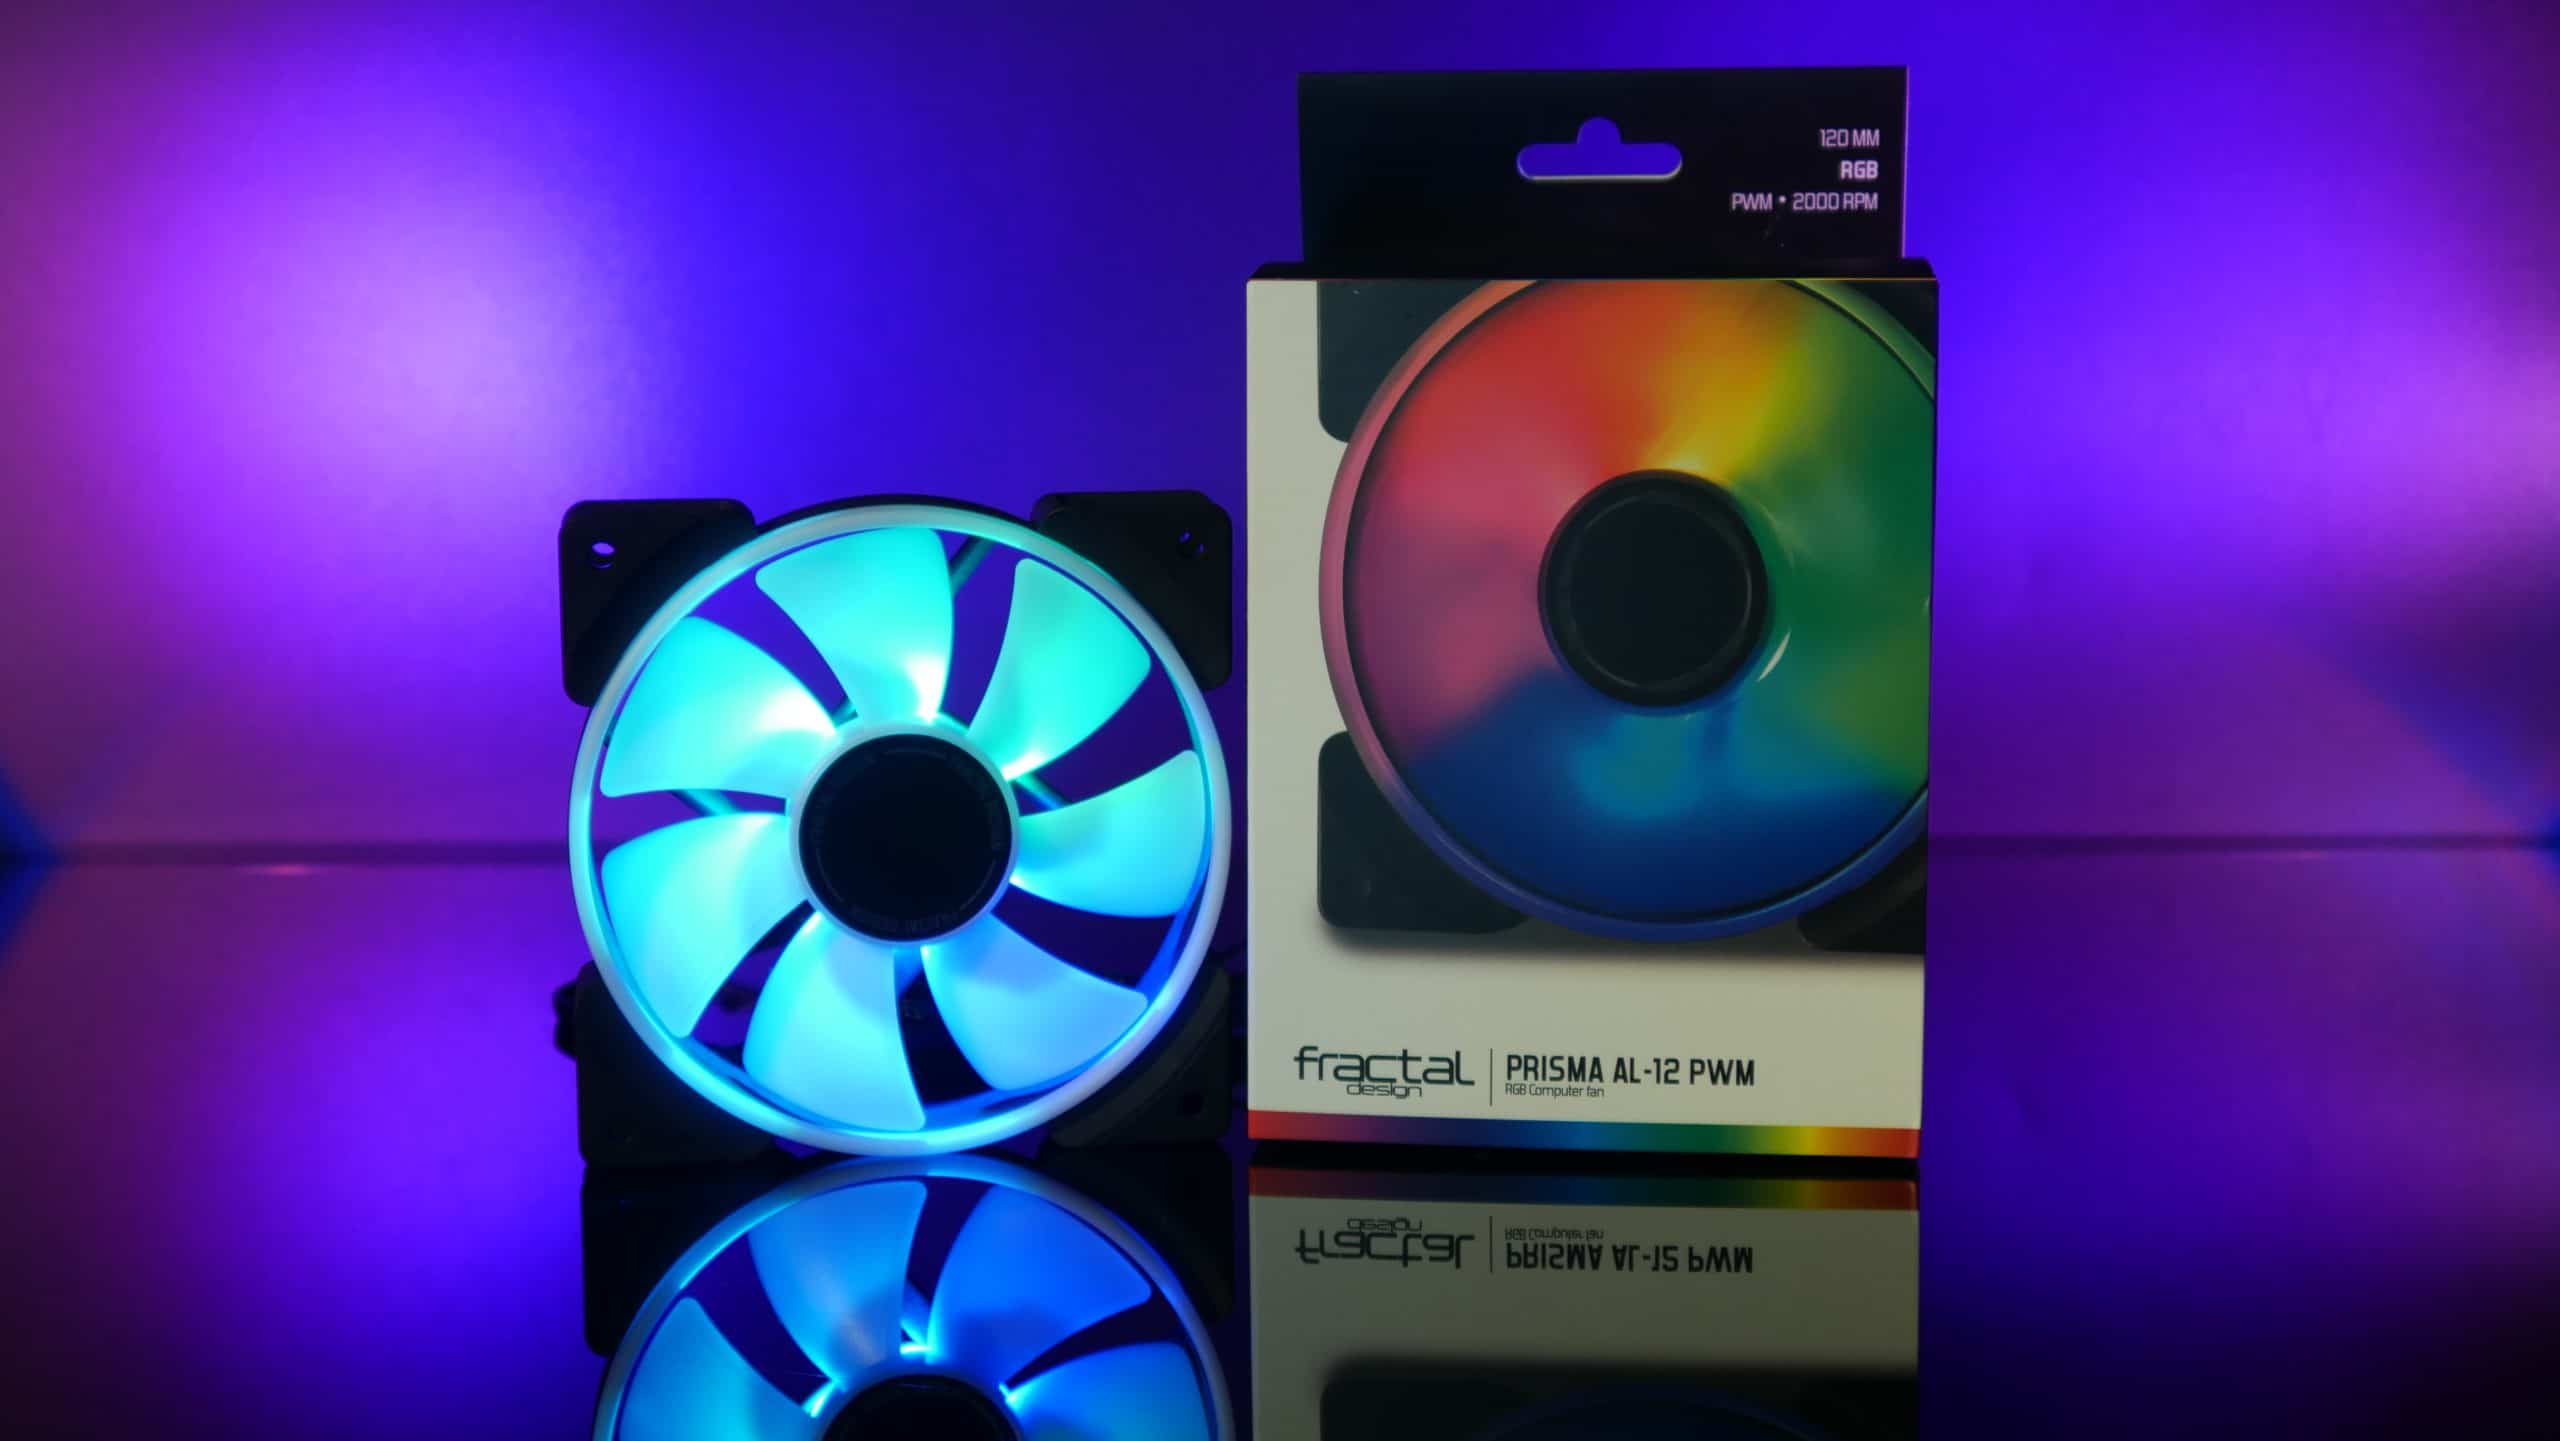 Fractal Prisma AL-12 PWM ARGB case fan tested - good fan for case and radiator, even at lower speeds